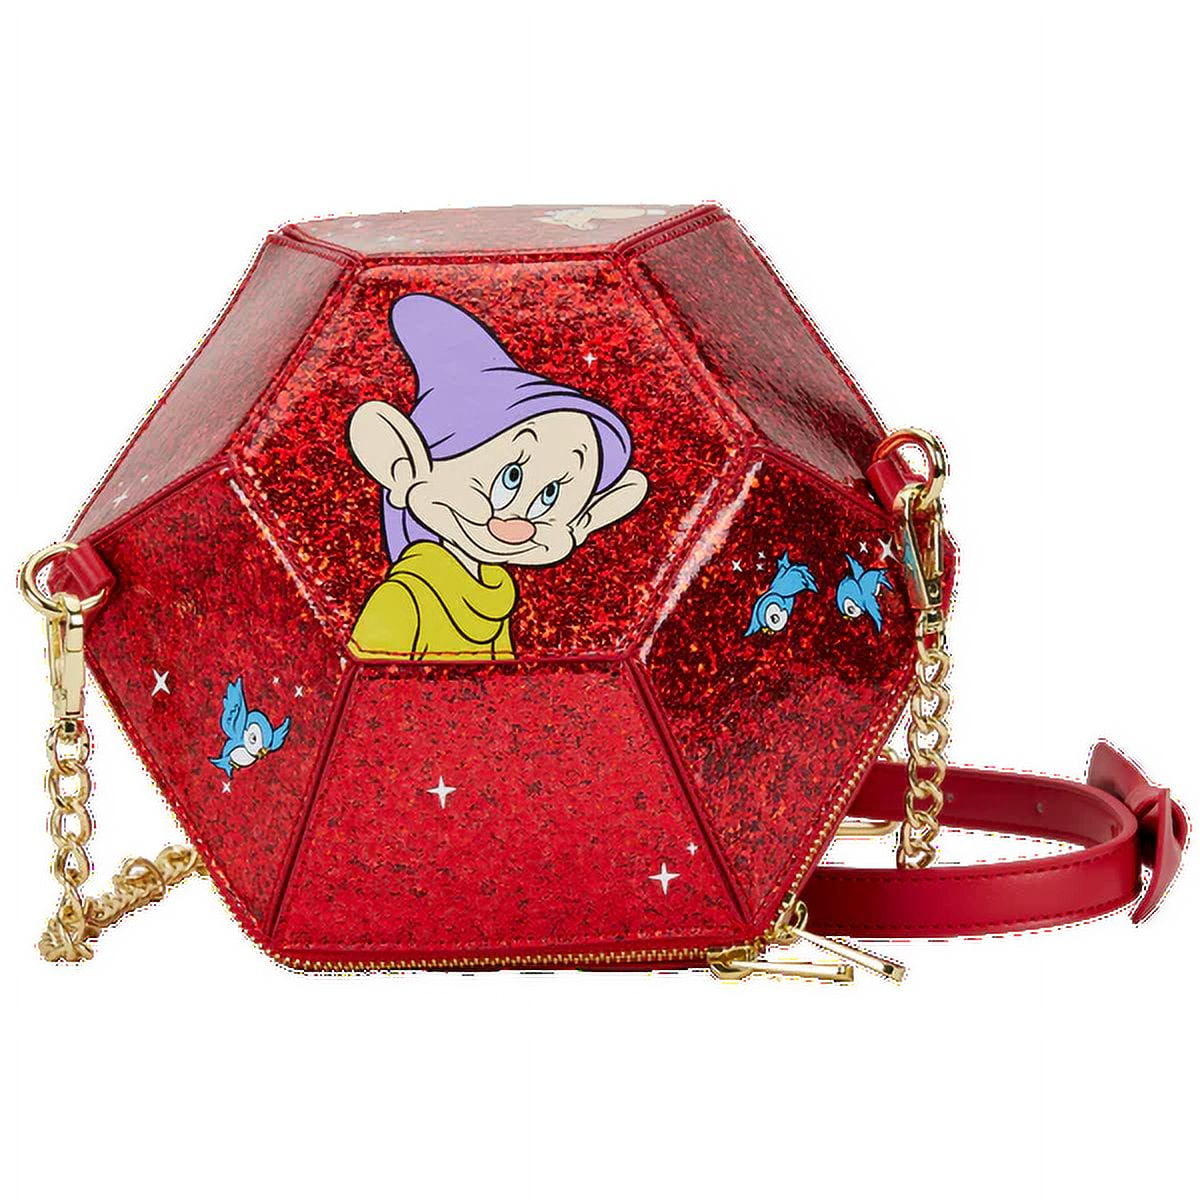 New Kate Spade x Snow White collection featuring bags and wallets! Comment  SNOW below and we will send you a price list! #disneybag #kate... |  Instagram